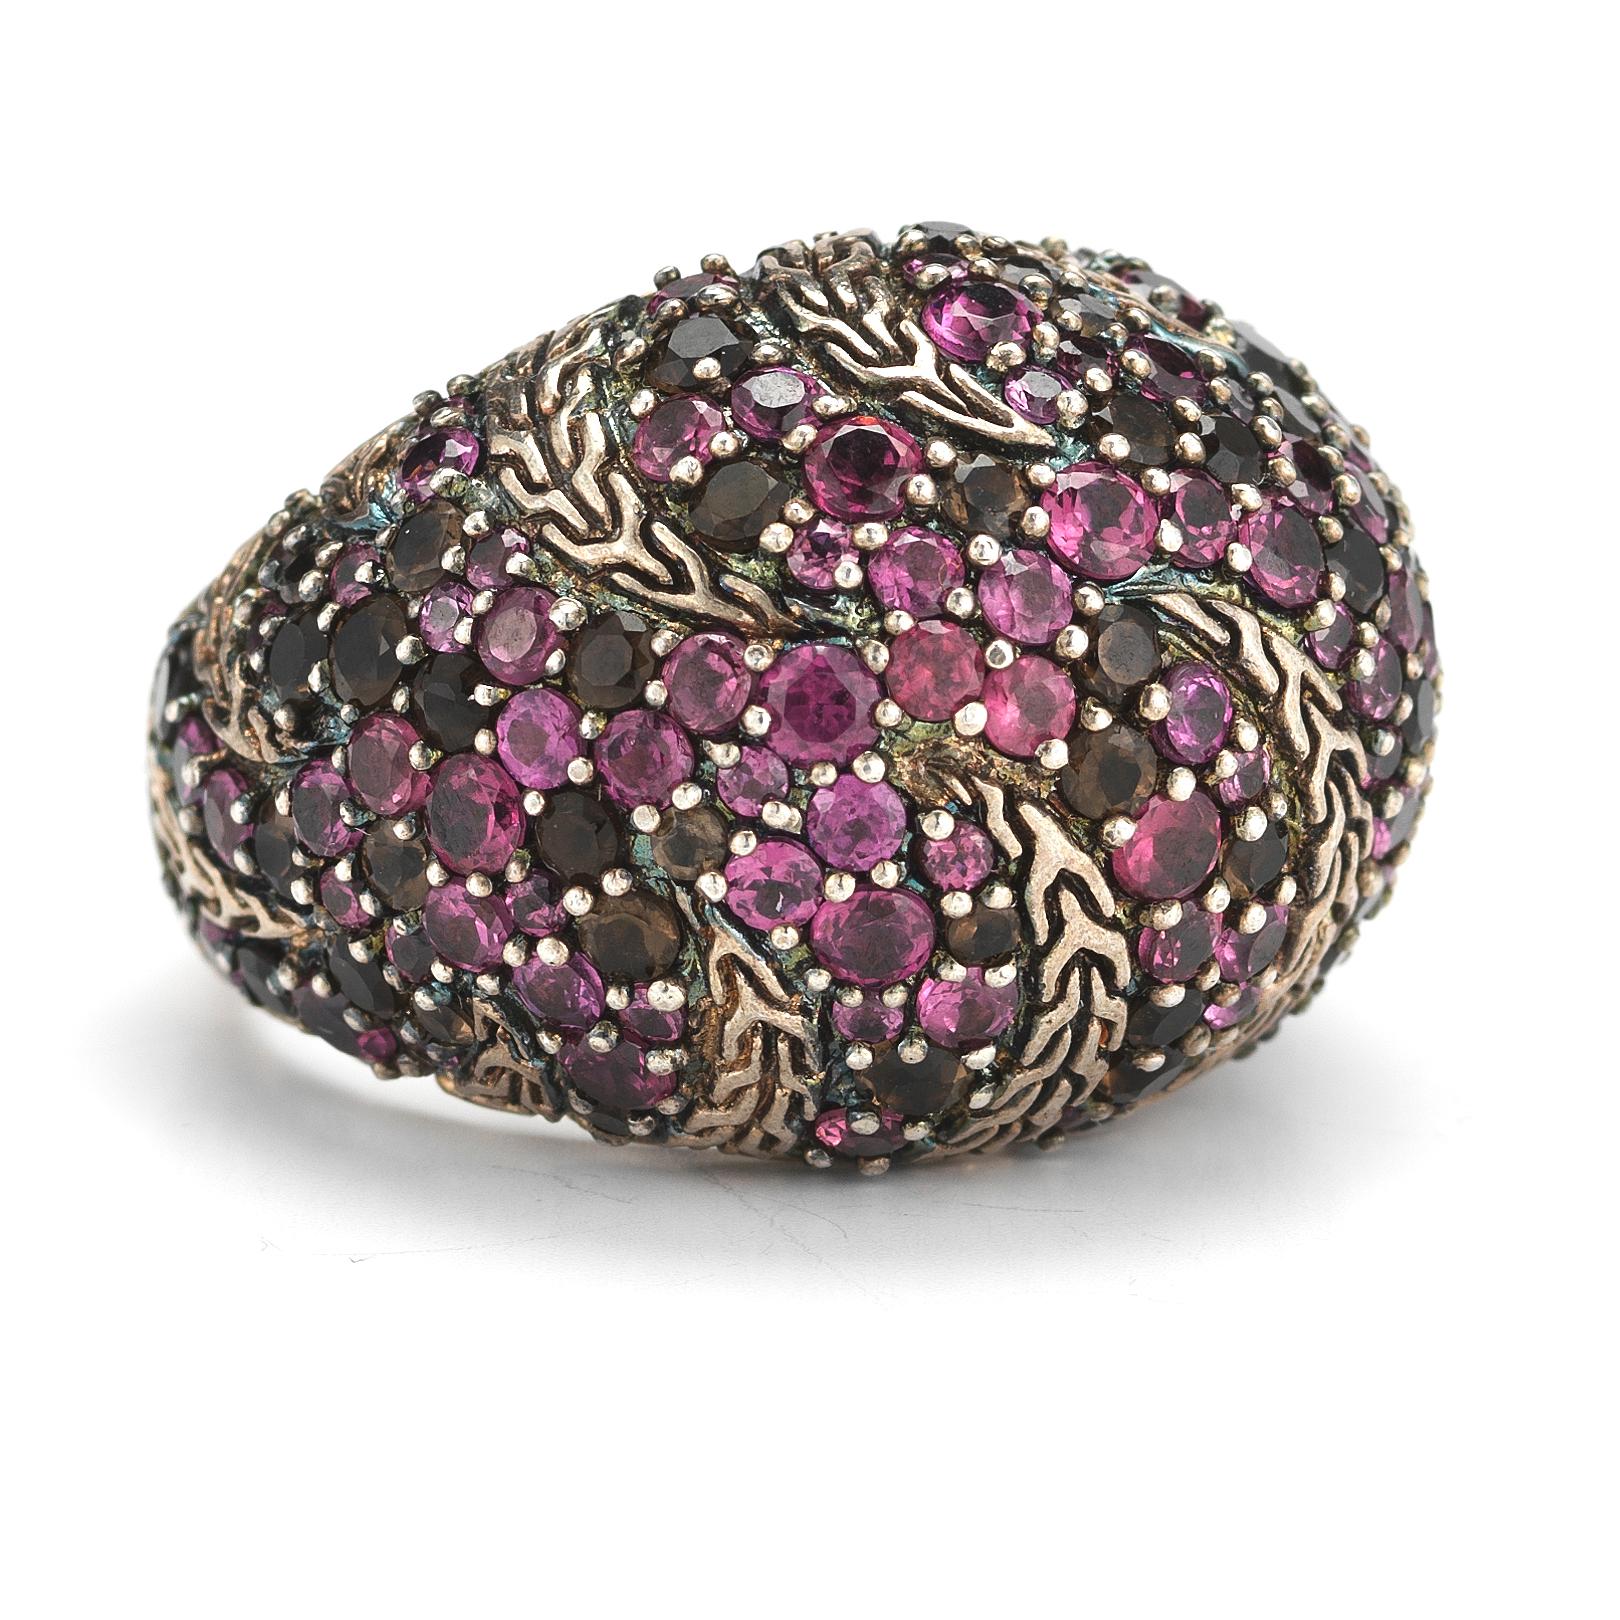 Oversized dome ring cast in sterling silver bears a braided stripe detail in dark pink cherry blossom colorway with light rhodolite and smoky quartz pave. Approx. setting diameter: 3/4 inch. Approx. band width: 1/2 inch at widest. Ring size 8.25

